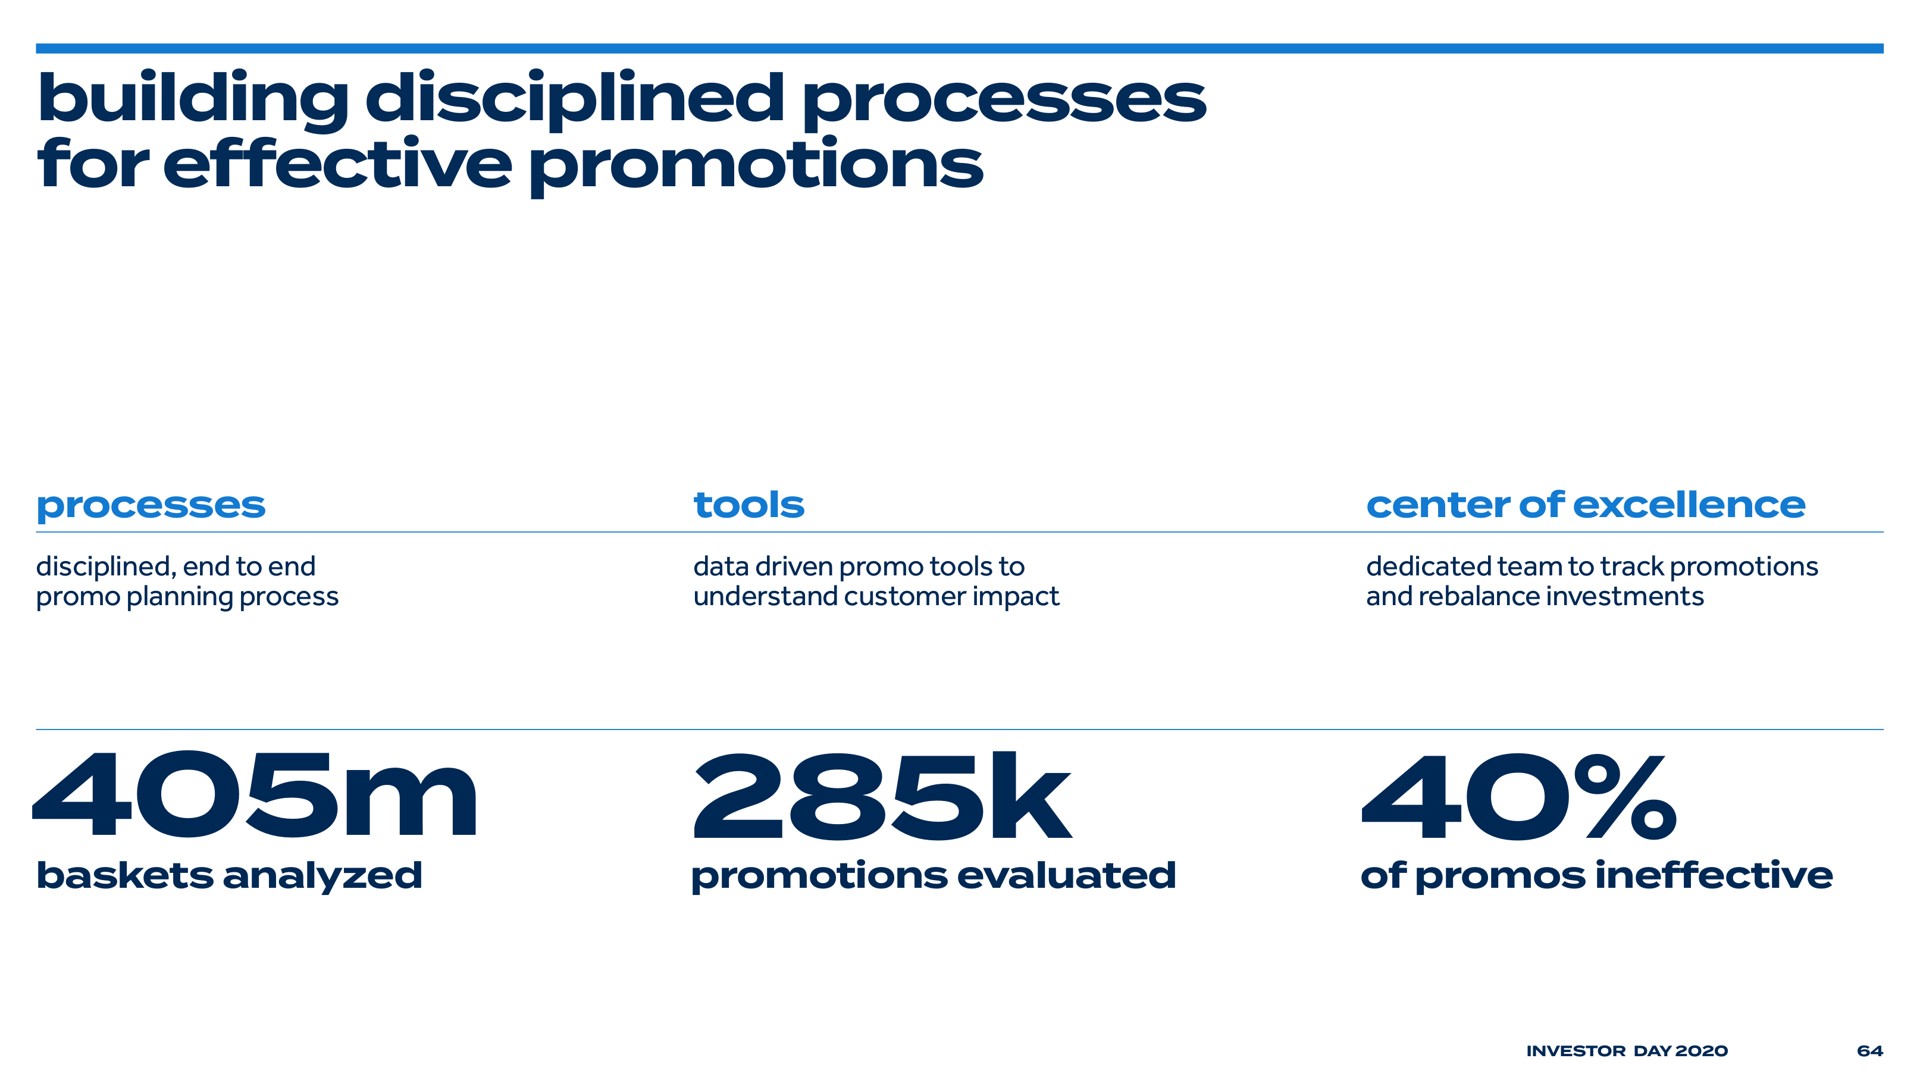 building disciplined processes for effective promotions | Bed Bath & Beyond